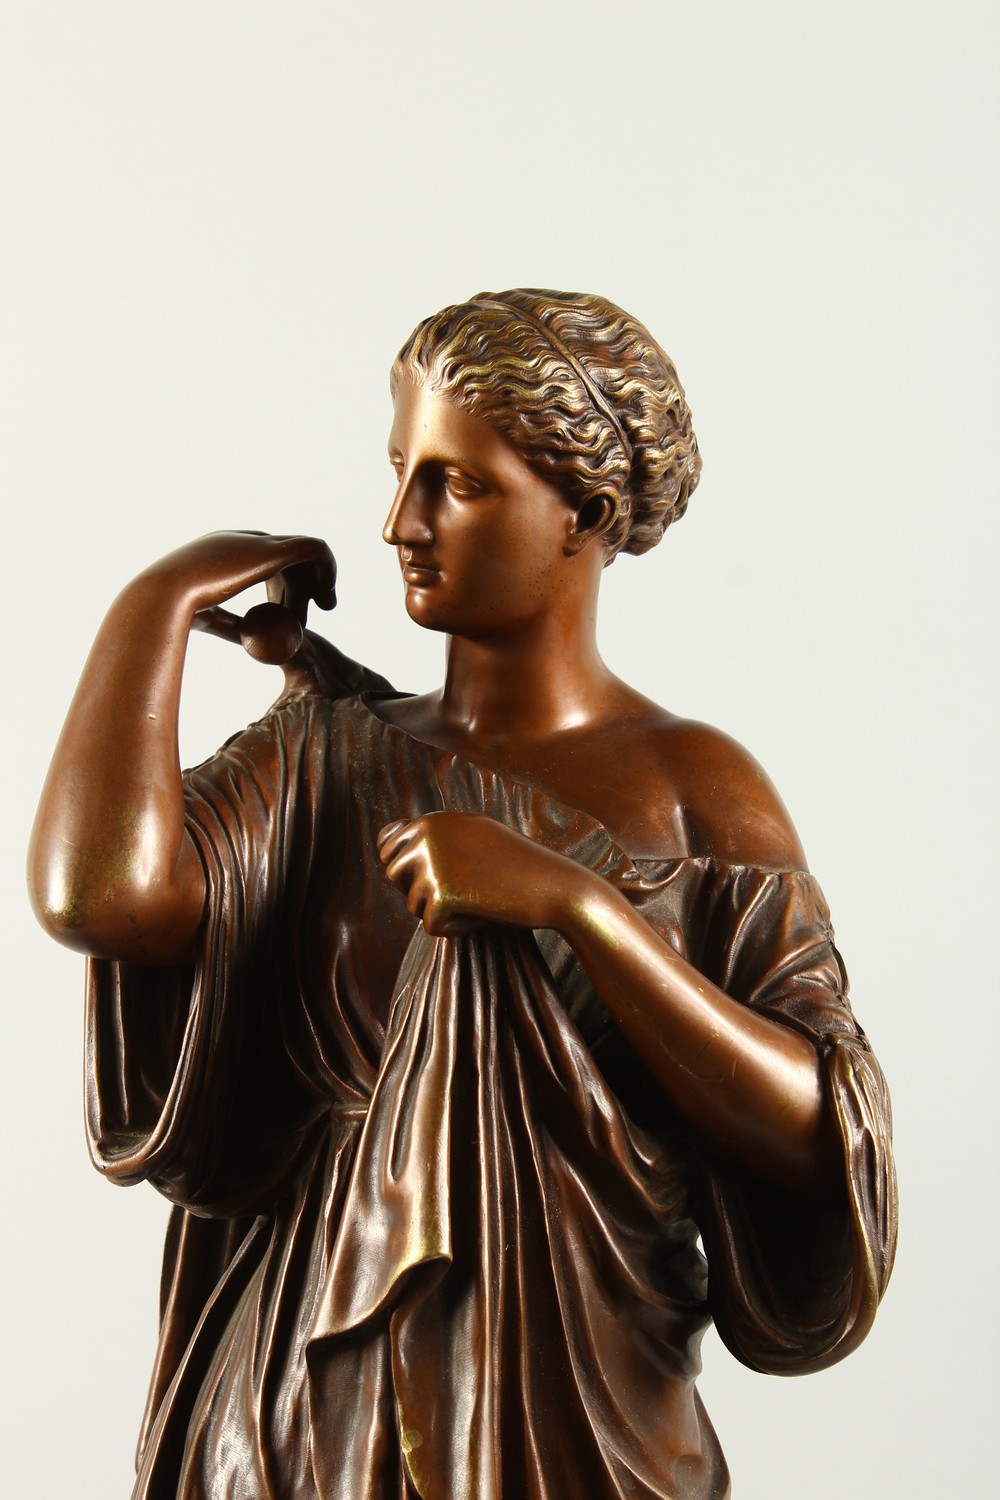 19TH CENTURY ITALIAN SCHOOL. A STANDING BRONZE OF A CLASSICAL LADY on a square base. 68cms high. - Image 2 of 9